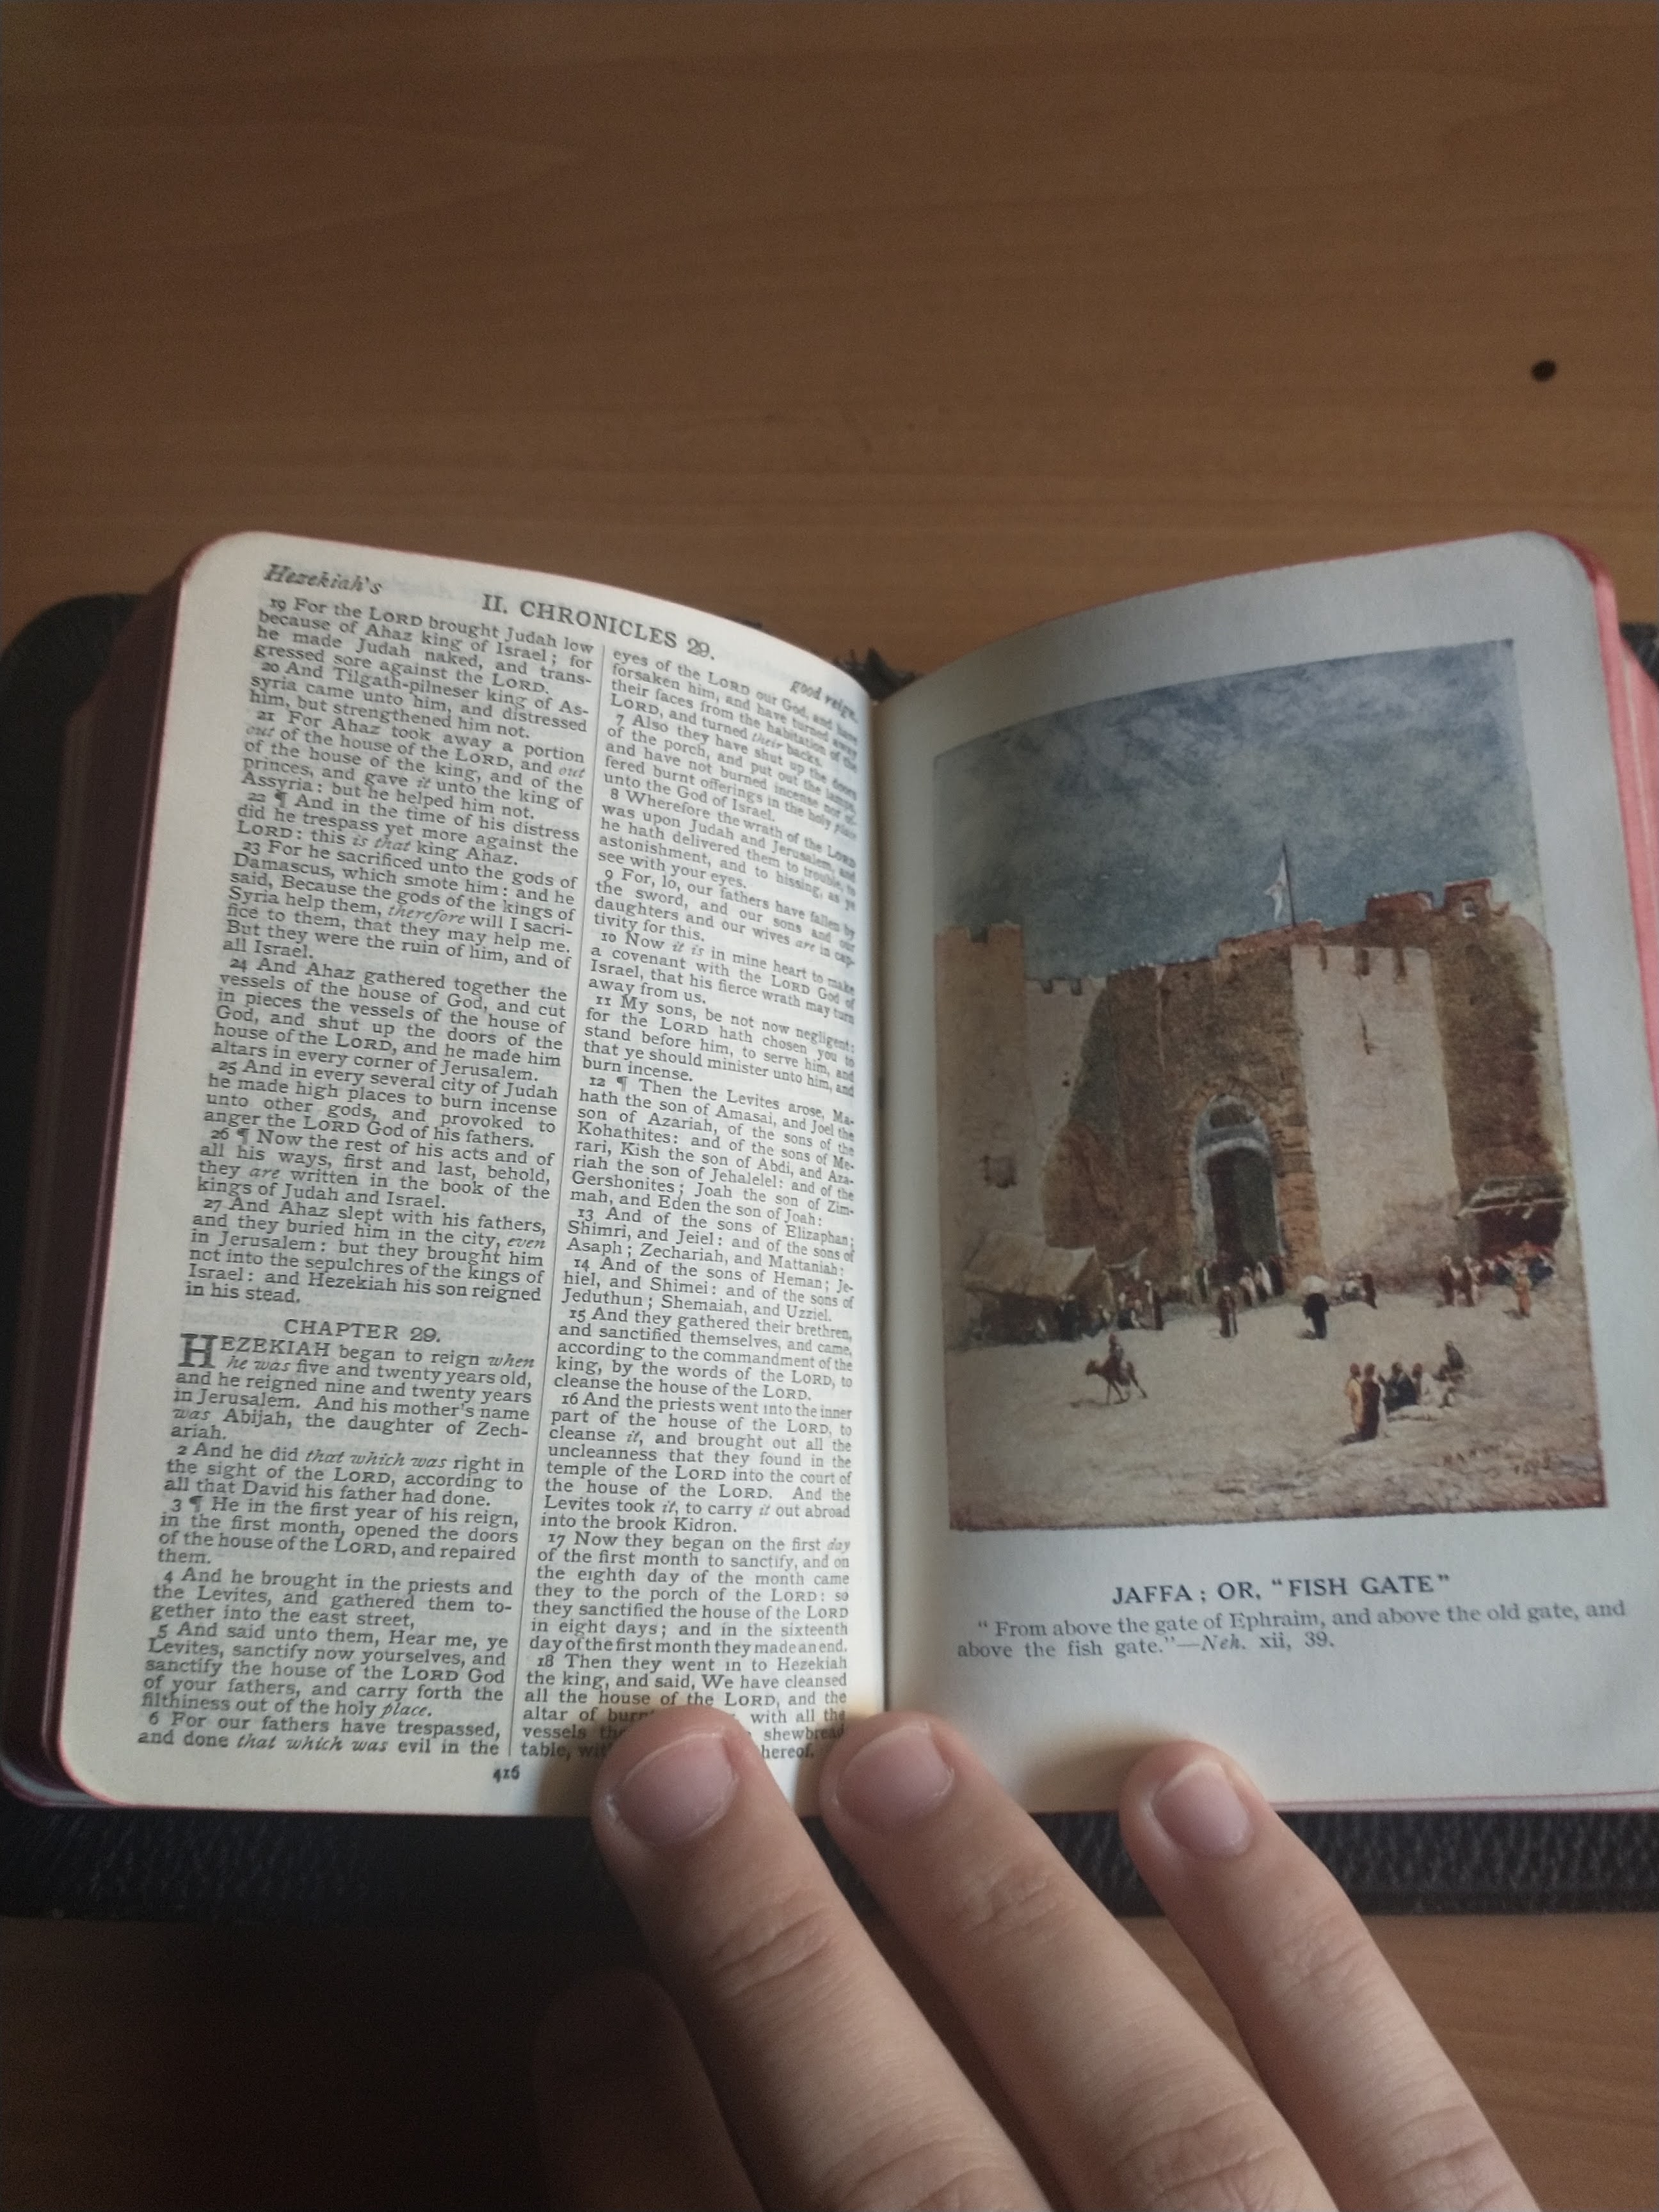 The Bible is open to pages further into the book. On the left page is II. Chronicles 29, in the same style as the previous photo. On the right page is an illustration titled "Jaffa; Or, "Fish Gate"". It is in the same style as before. In the foreground is a big sandstone castle with a white flag above it. There is an open gate, and people are walking in and out, and gathering around. There are two dilapidated market stands against the walls of the castle. A man travels by on a camel. The illustration is detailed enough to make out that these are people, and to see generally what they are doing, but not enough to make out any more personal details. The sky is blue.